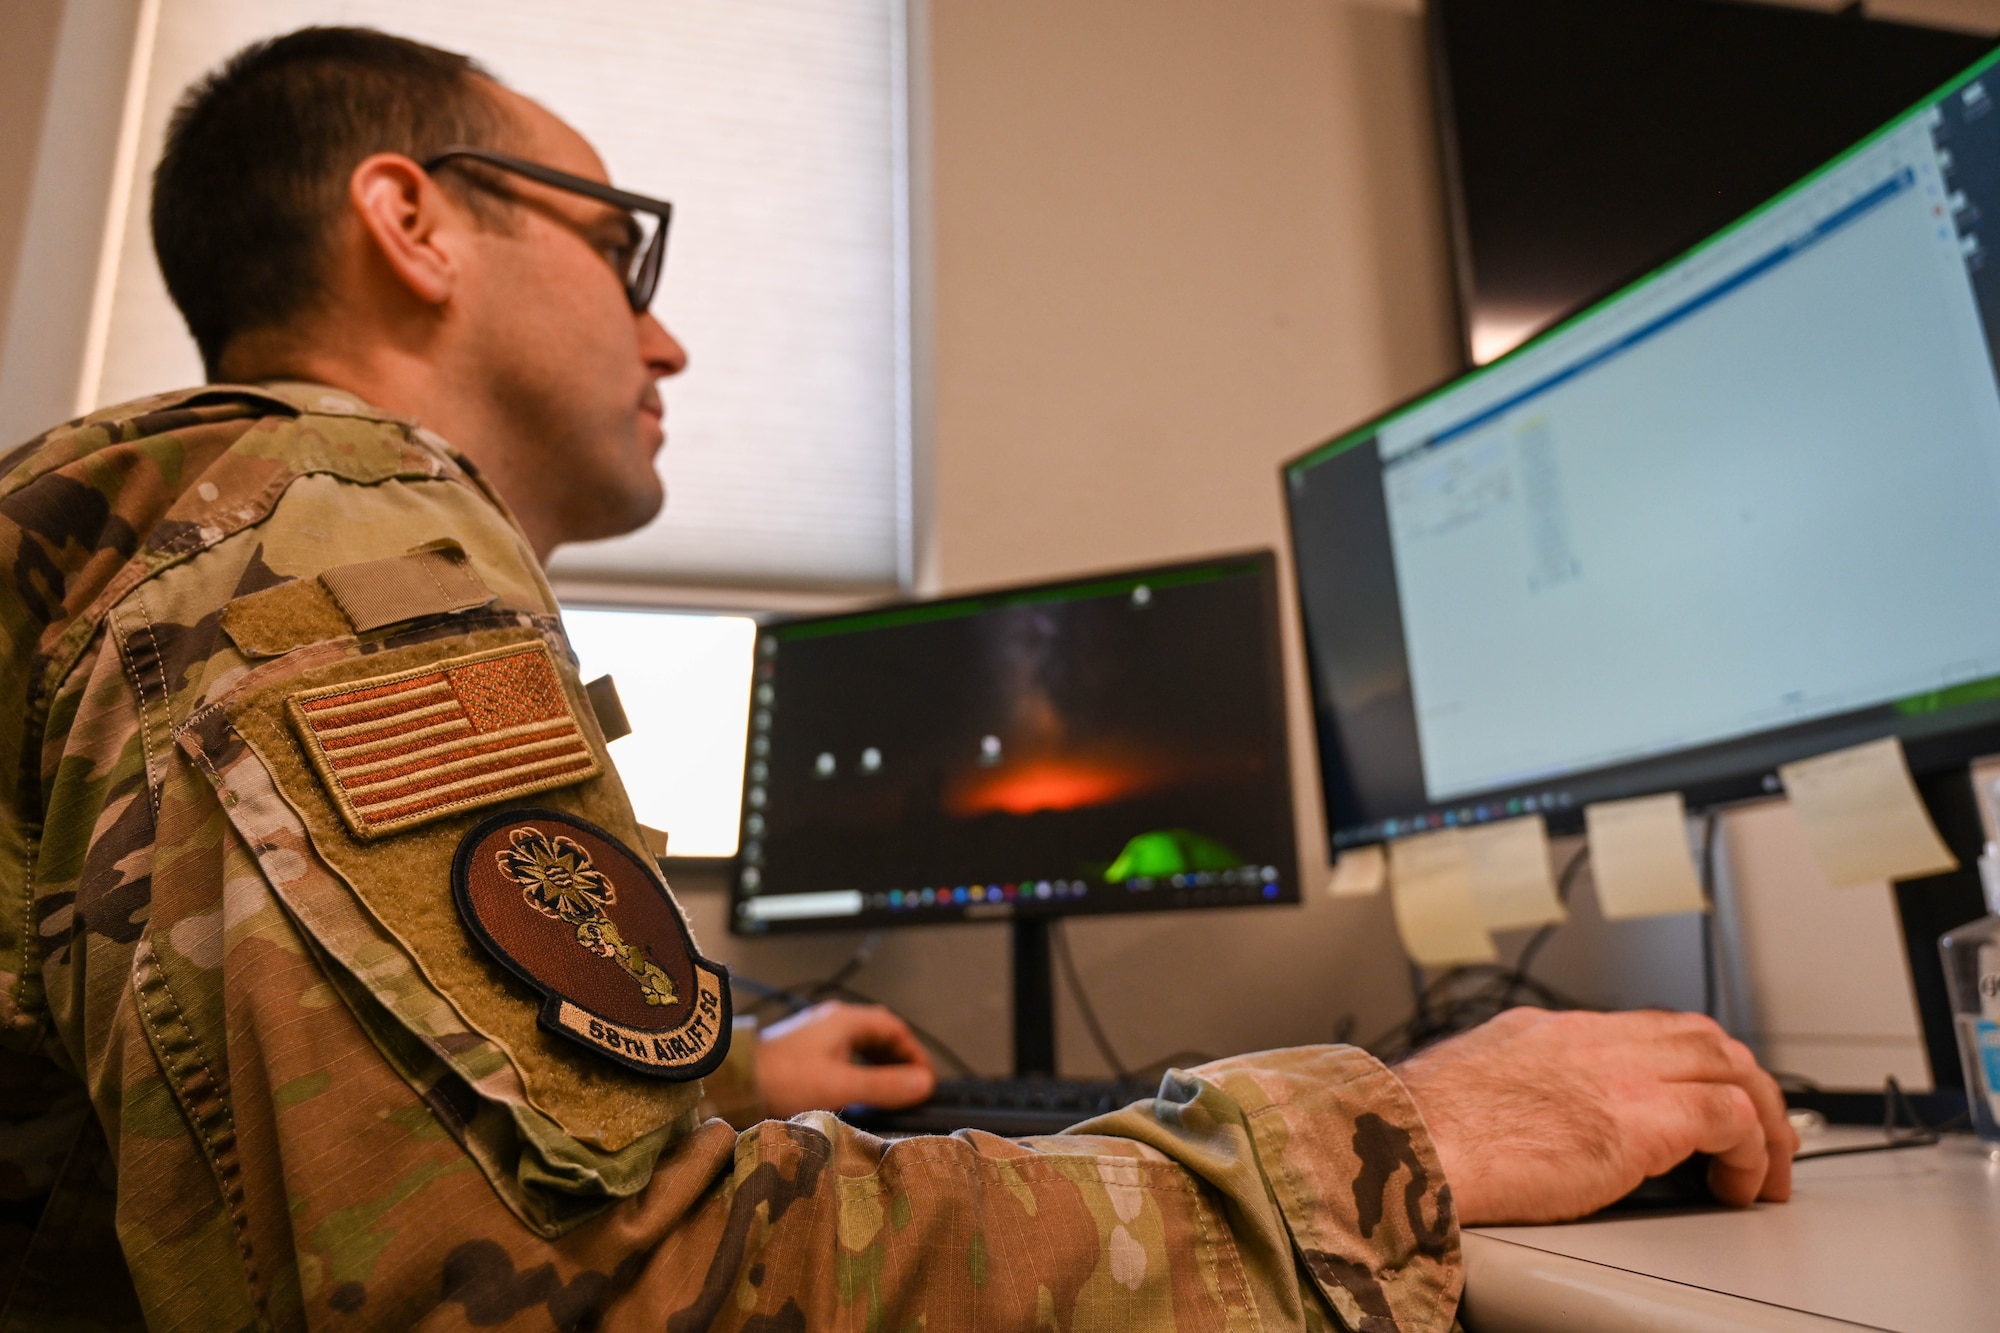 Senior Airman Richard Radtkin, 58th Airlift Squadron Squadron Aviation Resource Management (SARM) non-commissioned officer in charge, works on his computer at Altus Air Force Base, Oklahoma, Nov. 1, 2022. The self-named “One-Charlies” are interchangeable between the SARM and Host Aviation Resource Management offices. (U.S. Air Force photo by Senior Airman Trenton Jancze)